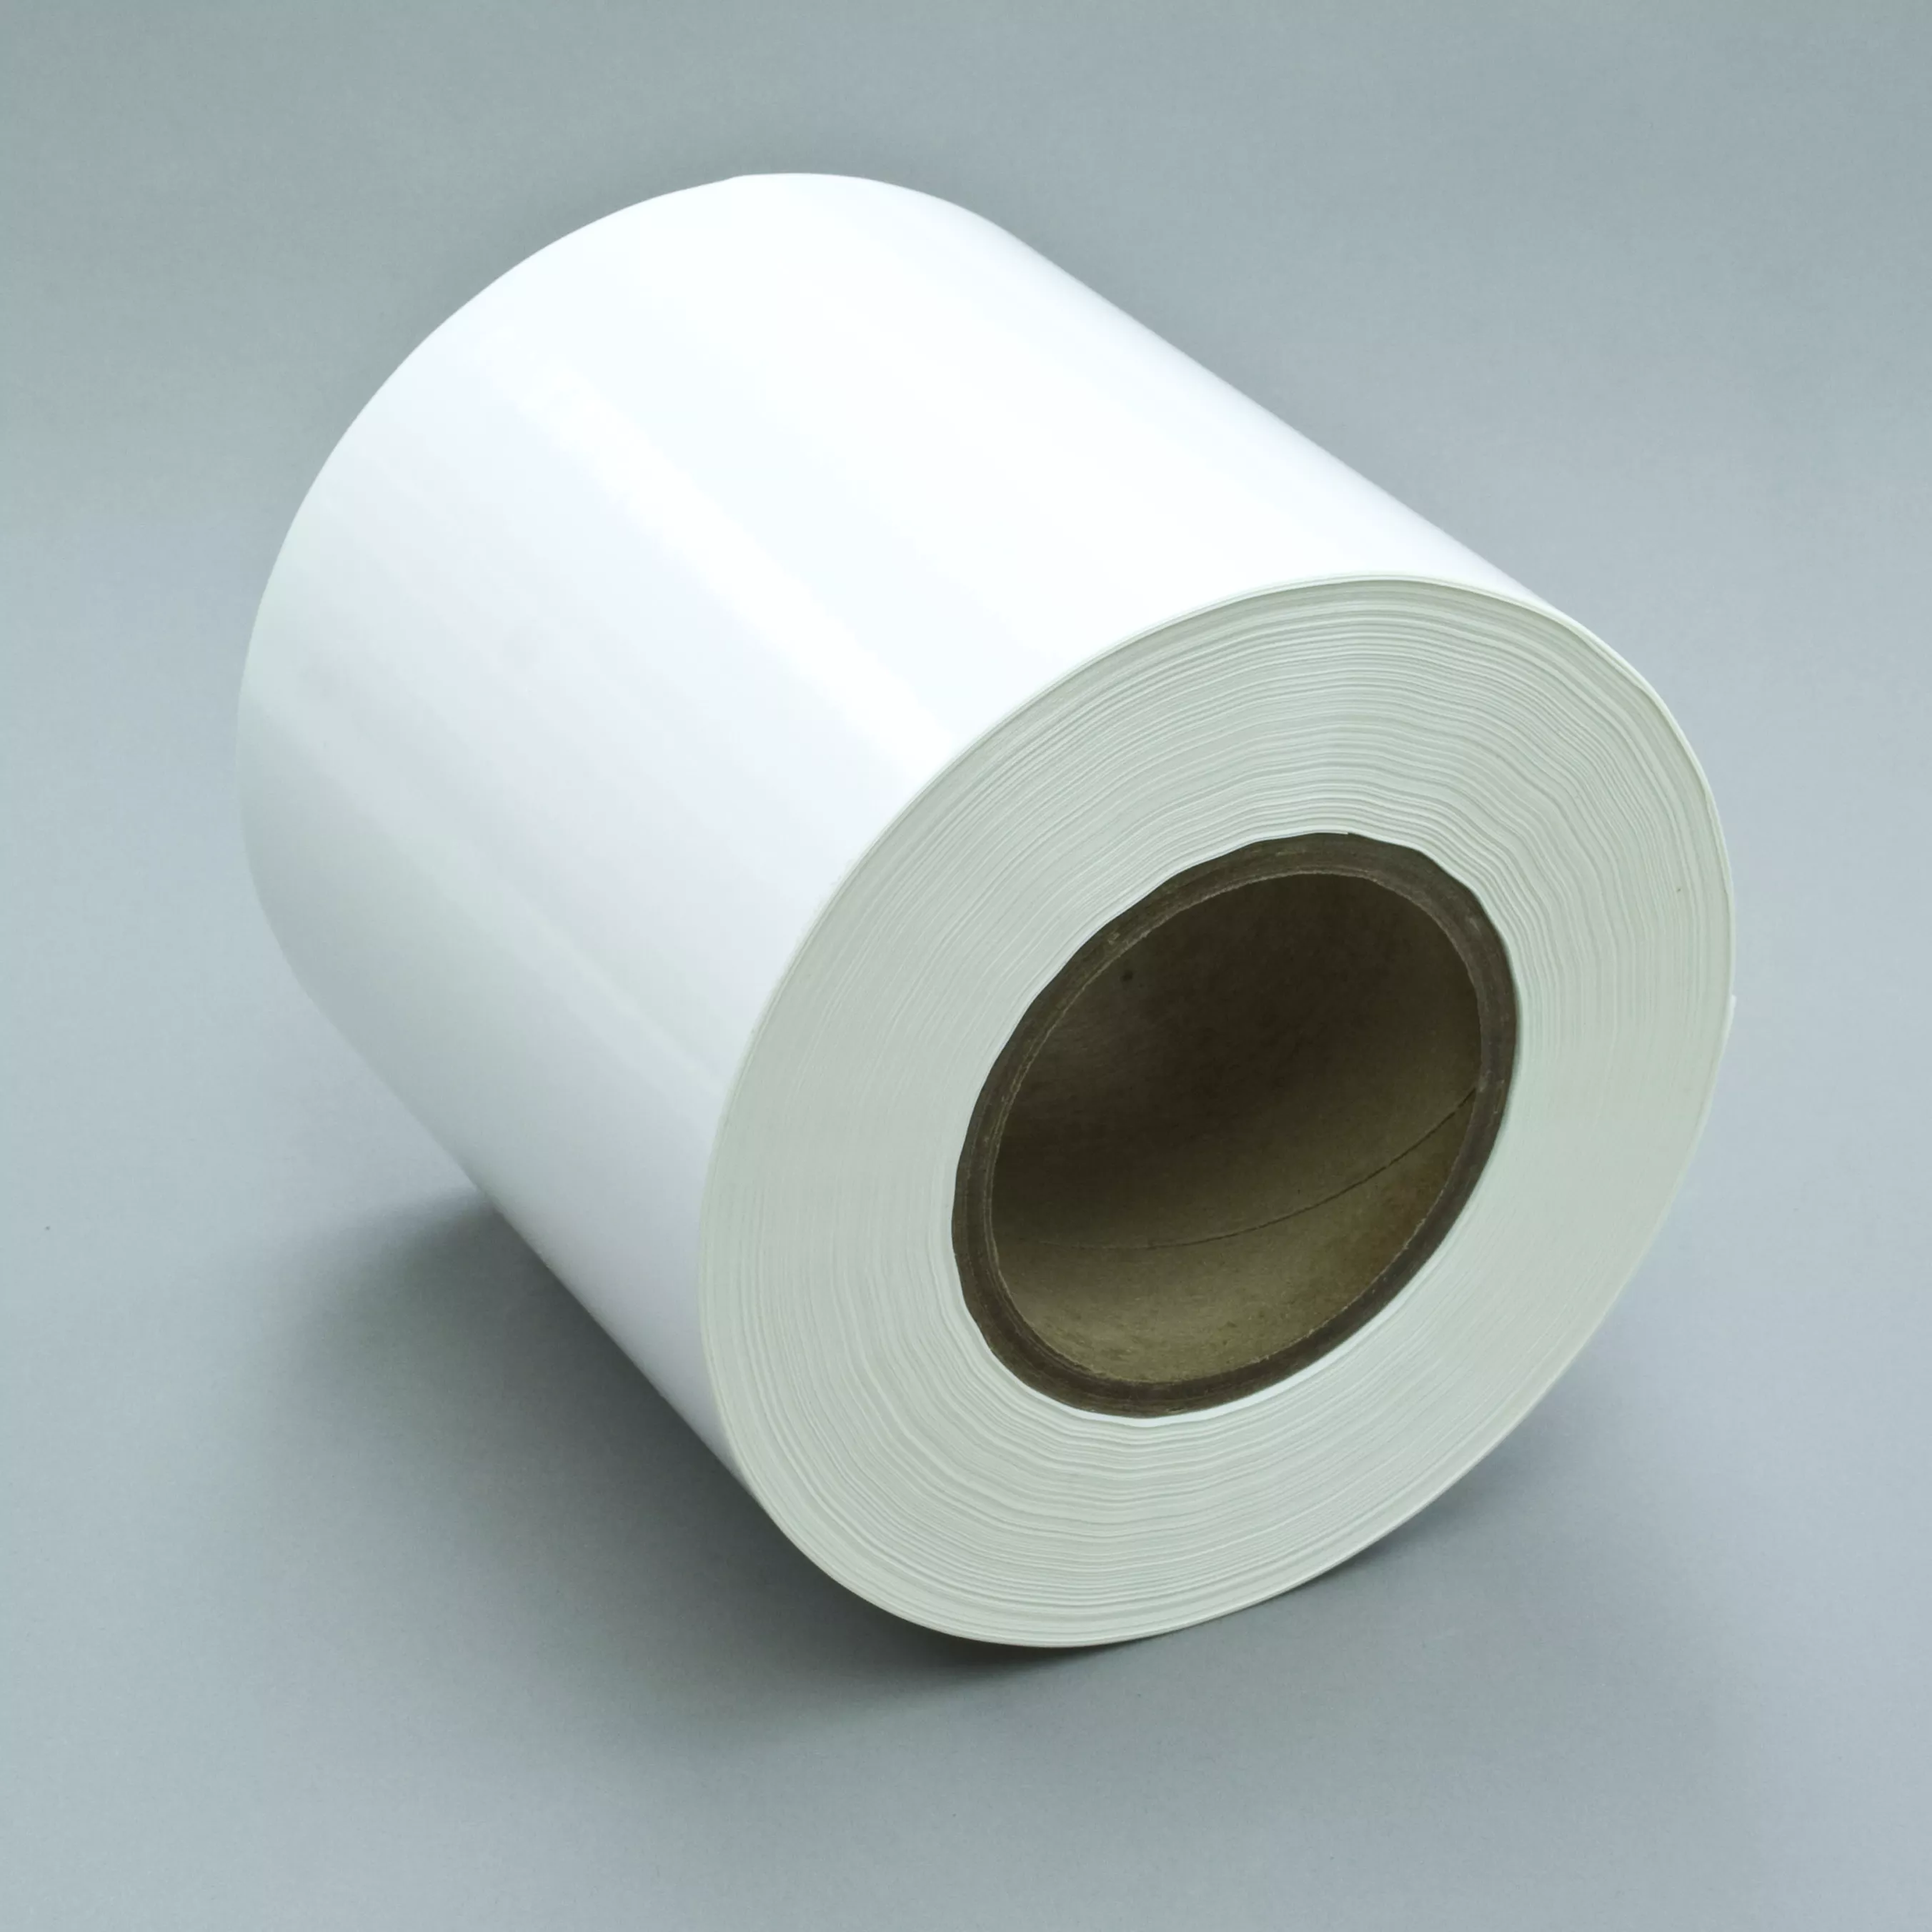 3M™ Sheet and Screen Label Material 7908, White Polyester Gloss, 20 in x
27 in, 100 Sheets/Case